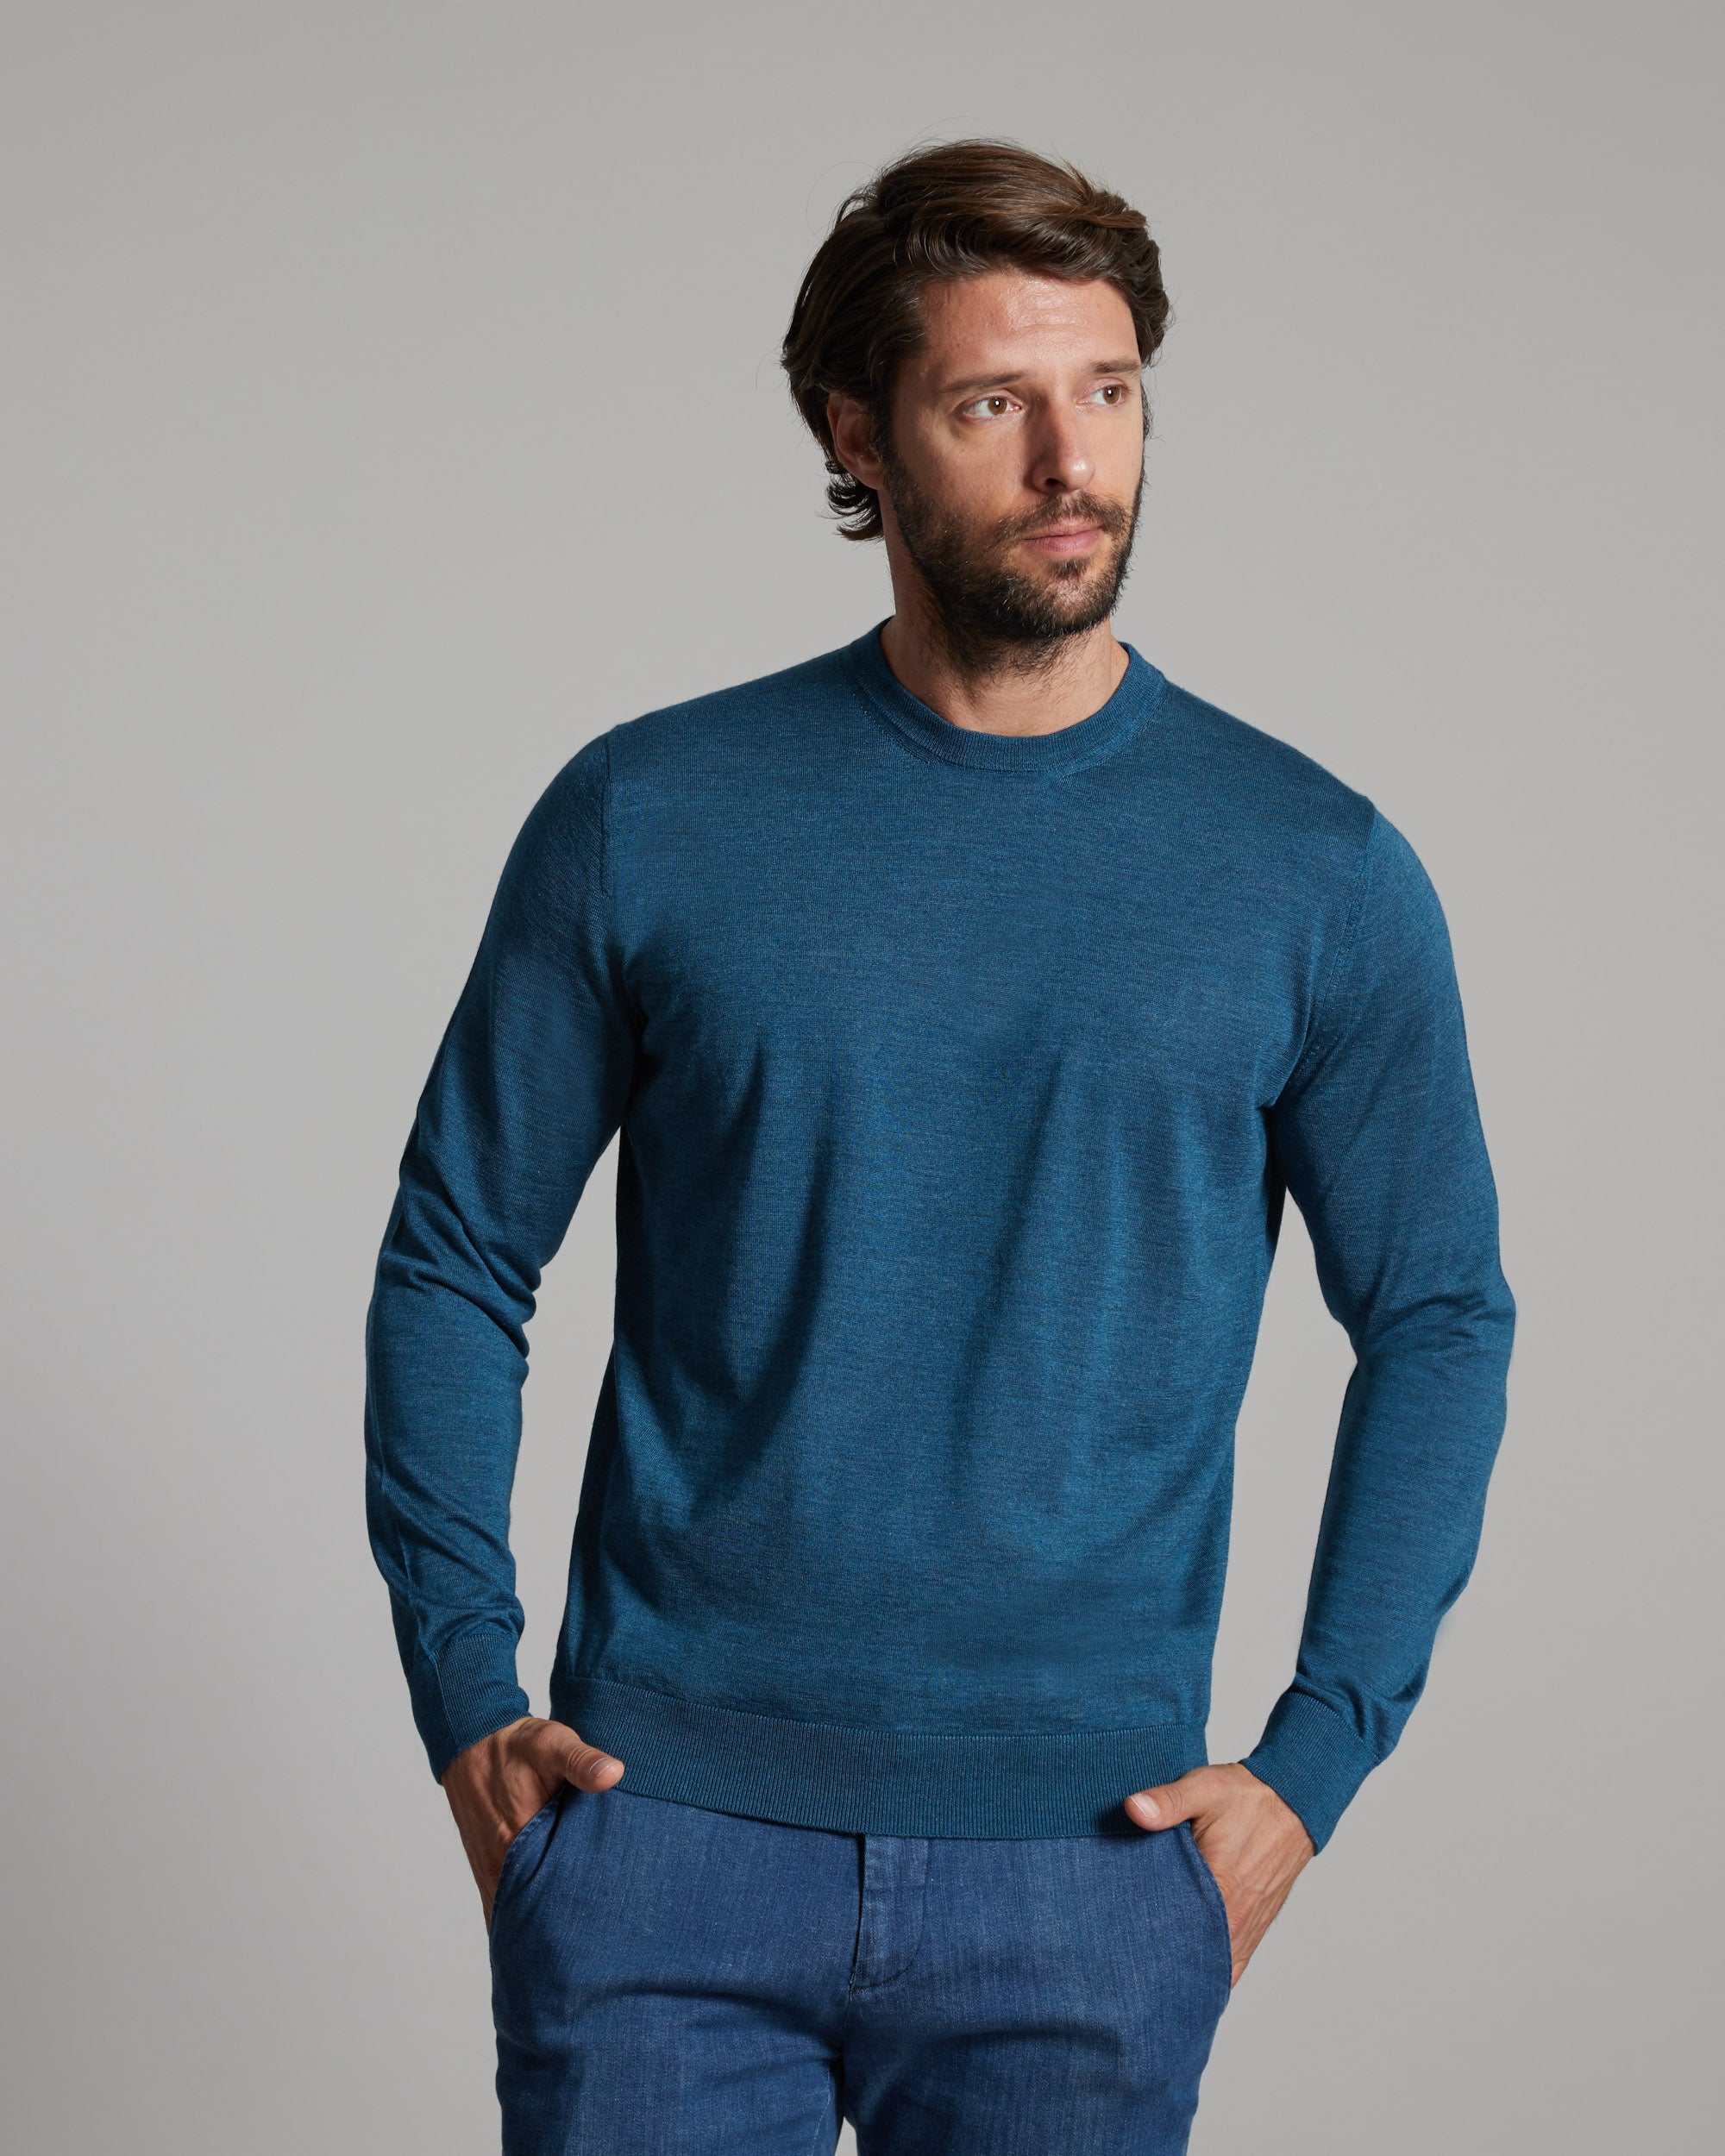 Teal Blue cashmere and silk men's round-neck sweater